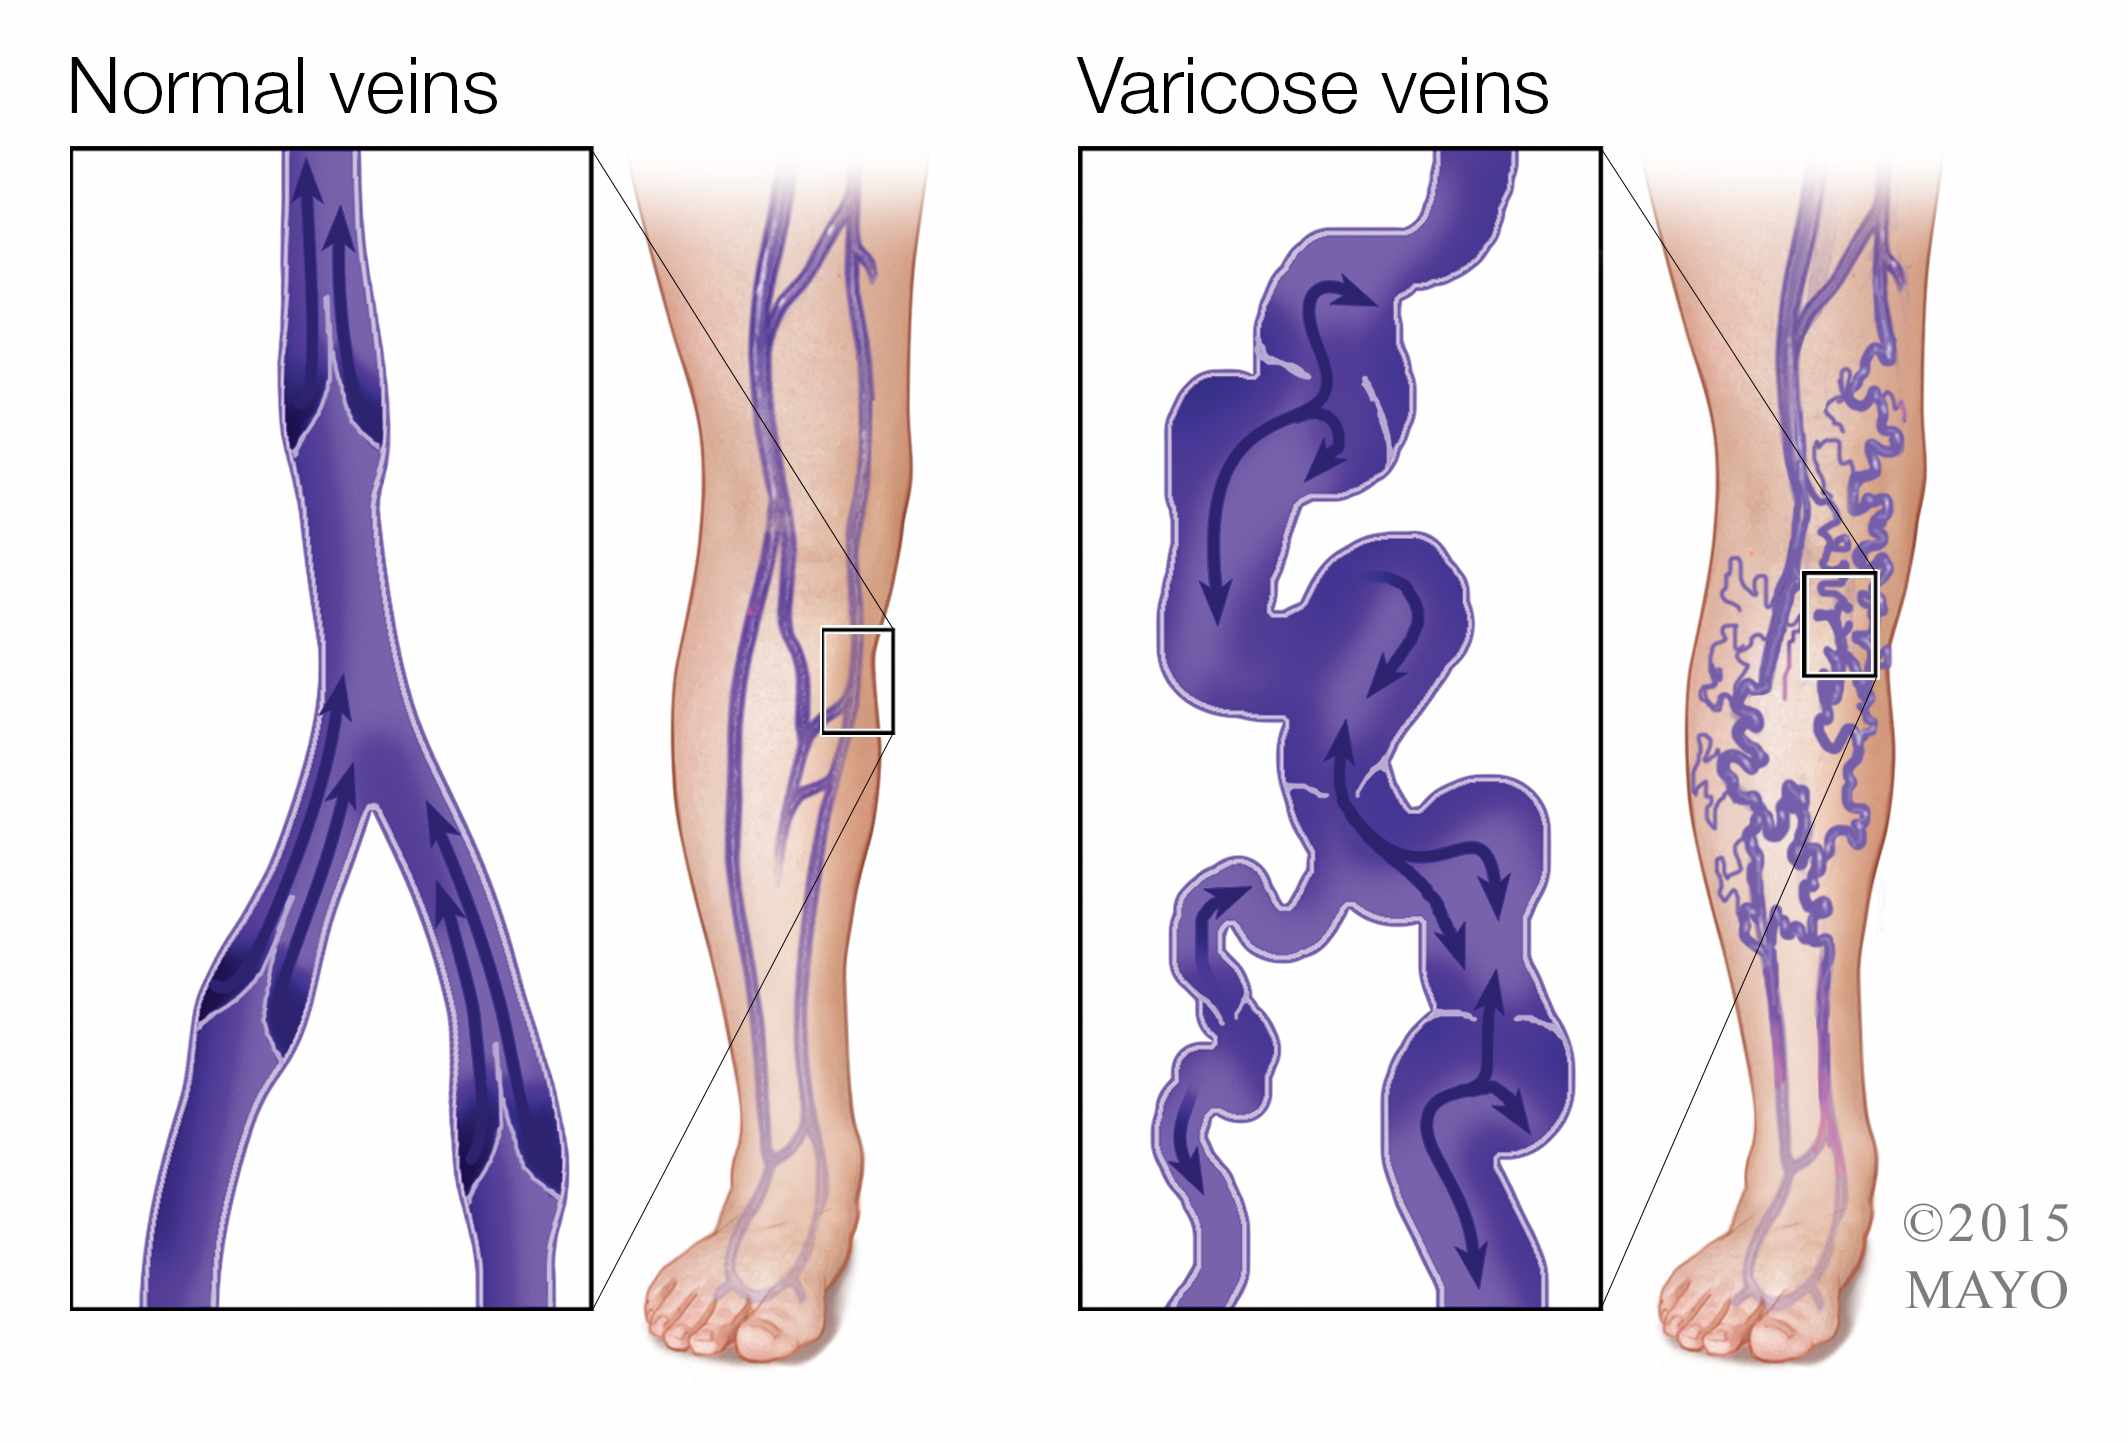 Varicose Veins and treatment options at the Vascular Clinic in